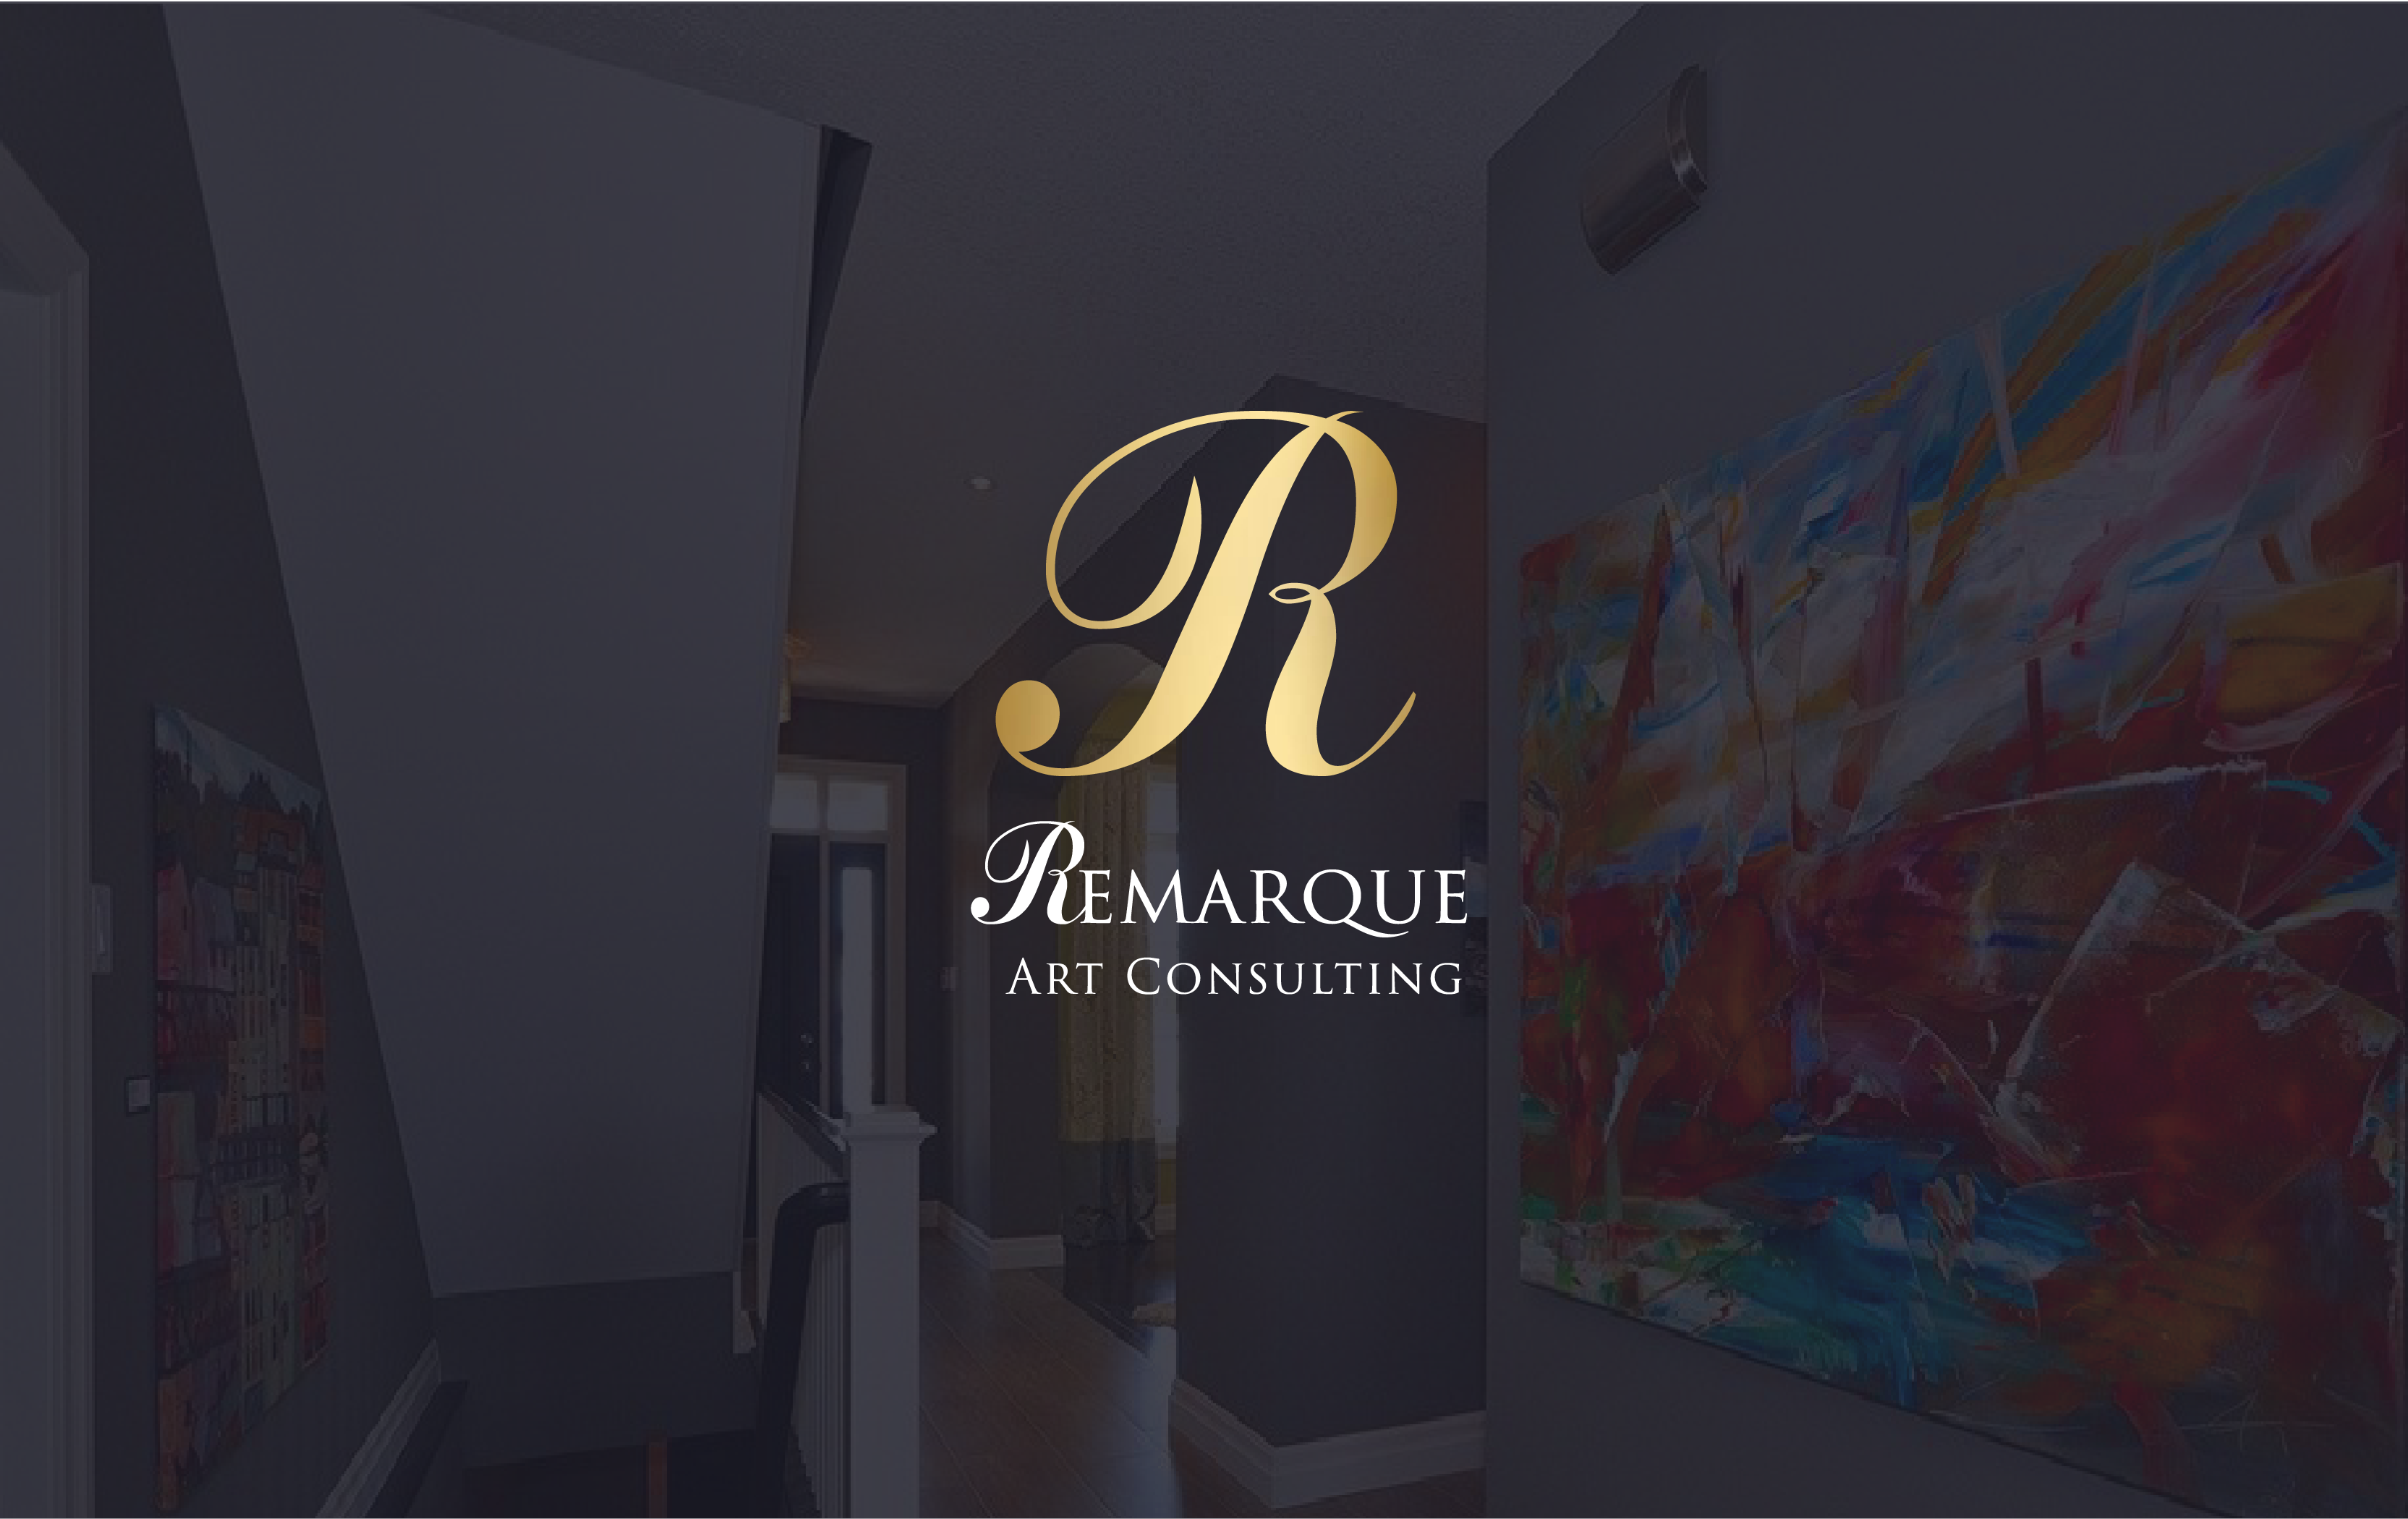 Remarque Art Consulting